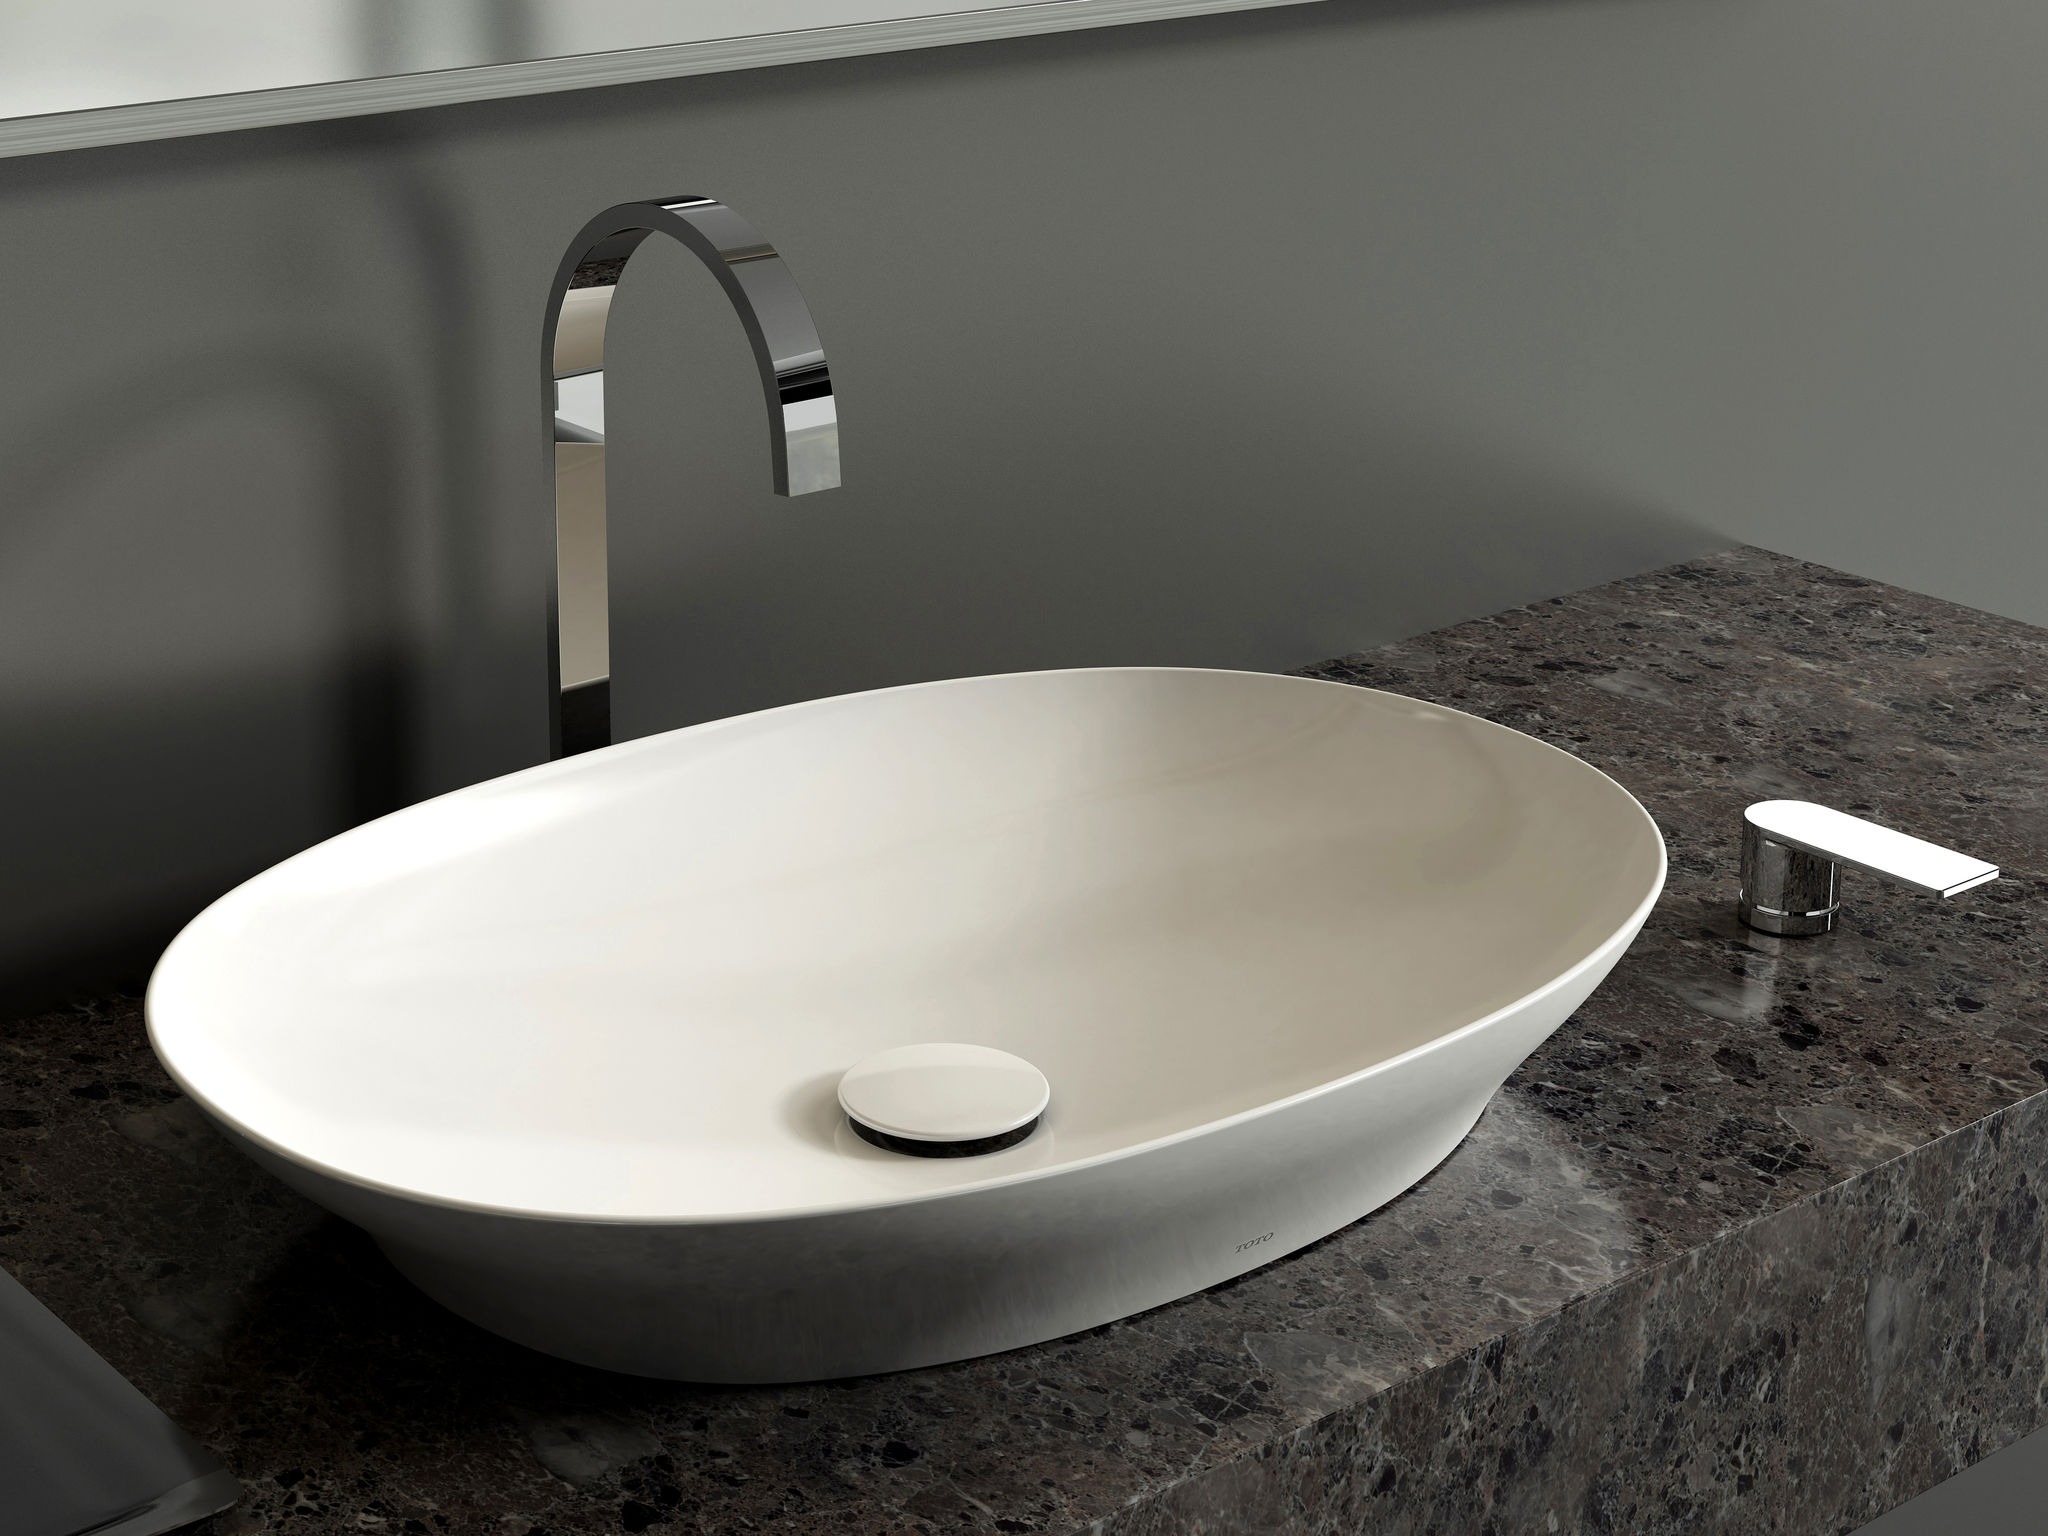 How to Select the Best Seller of Wash Basin Double Bowl Sink in Dubai